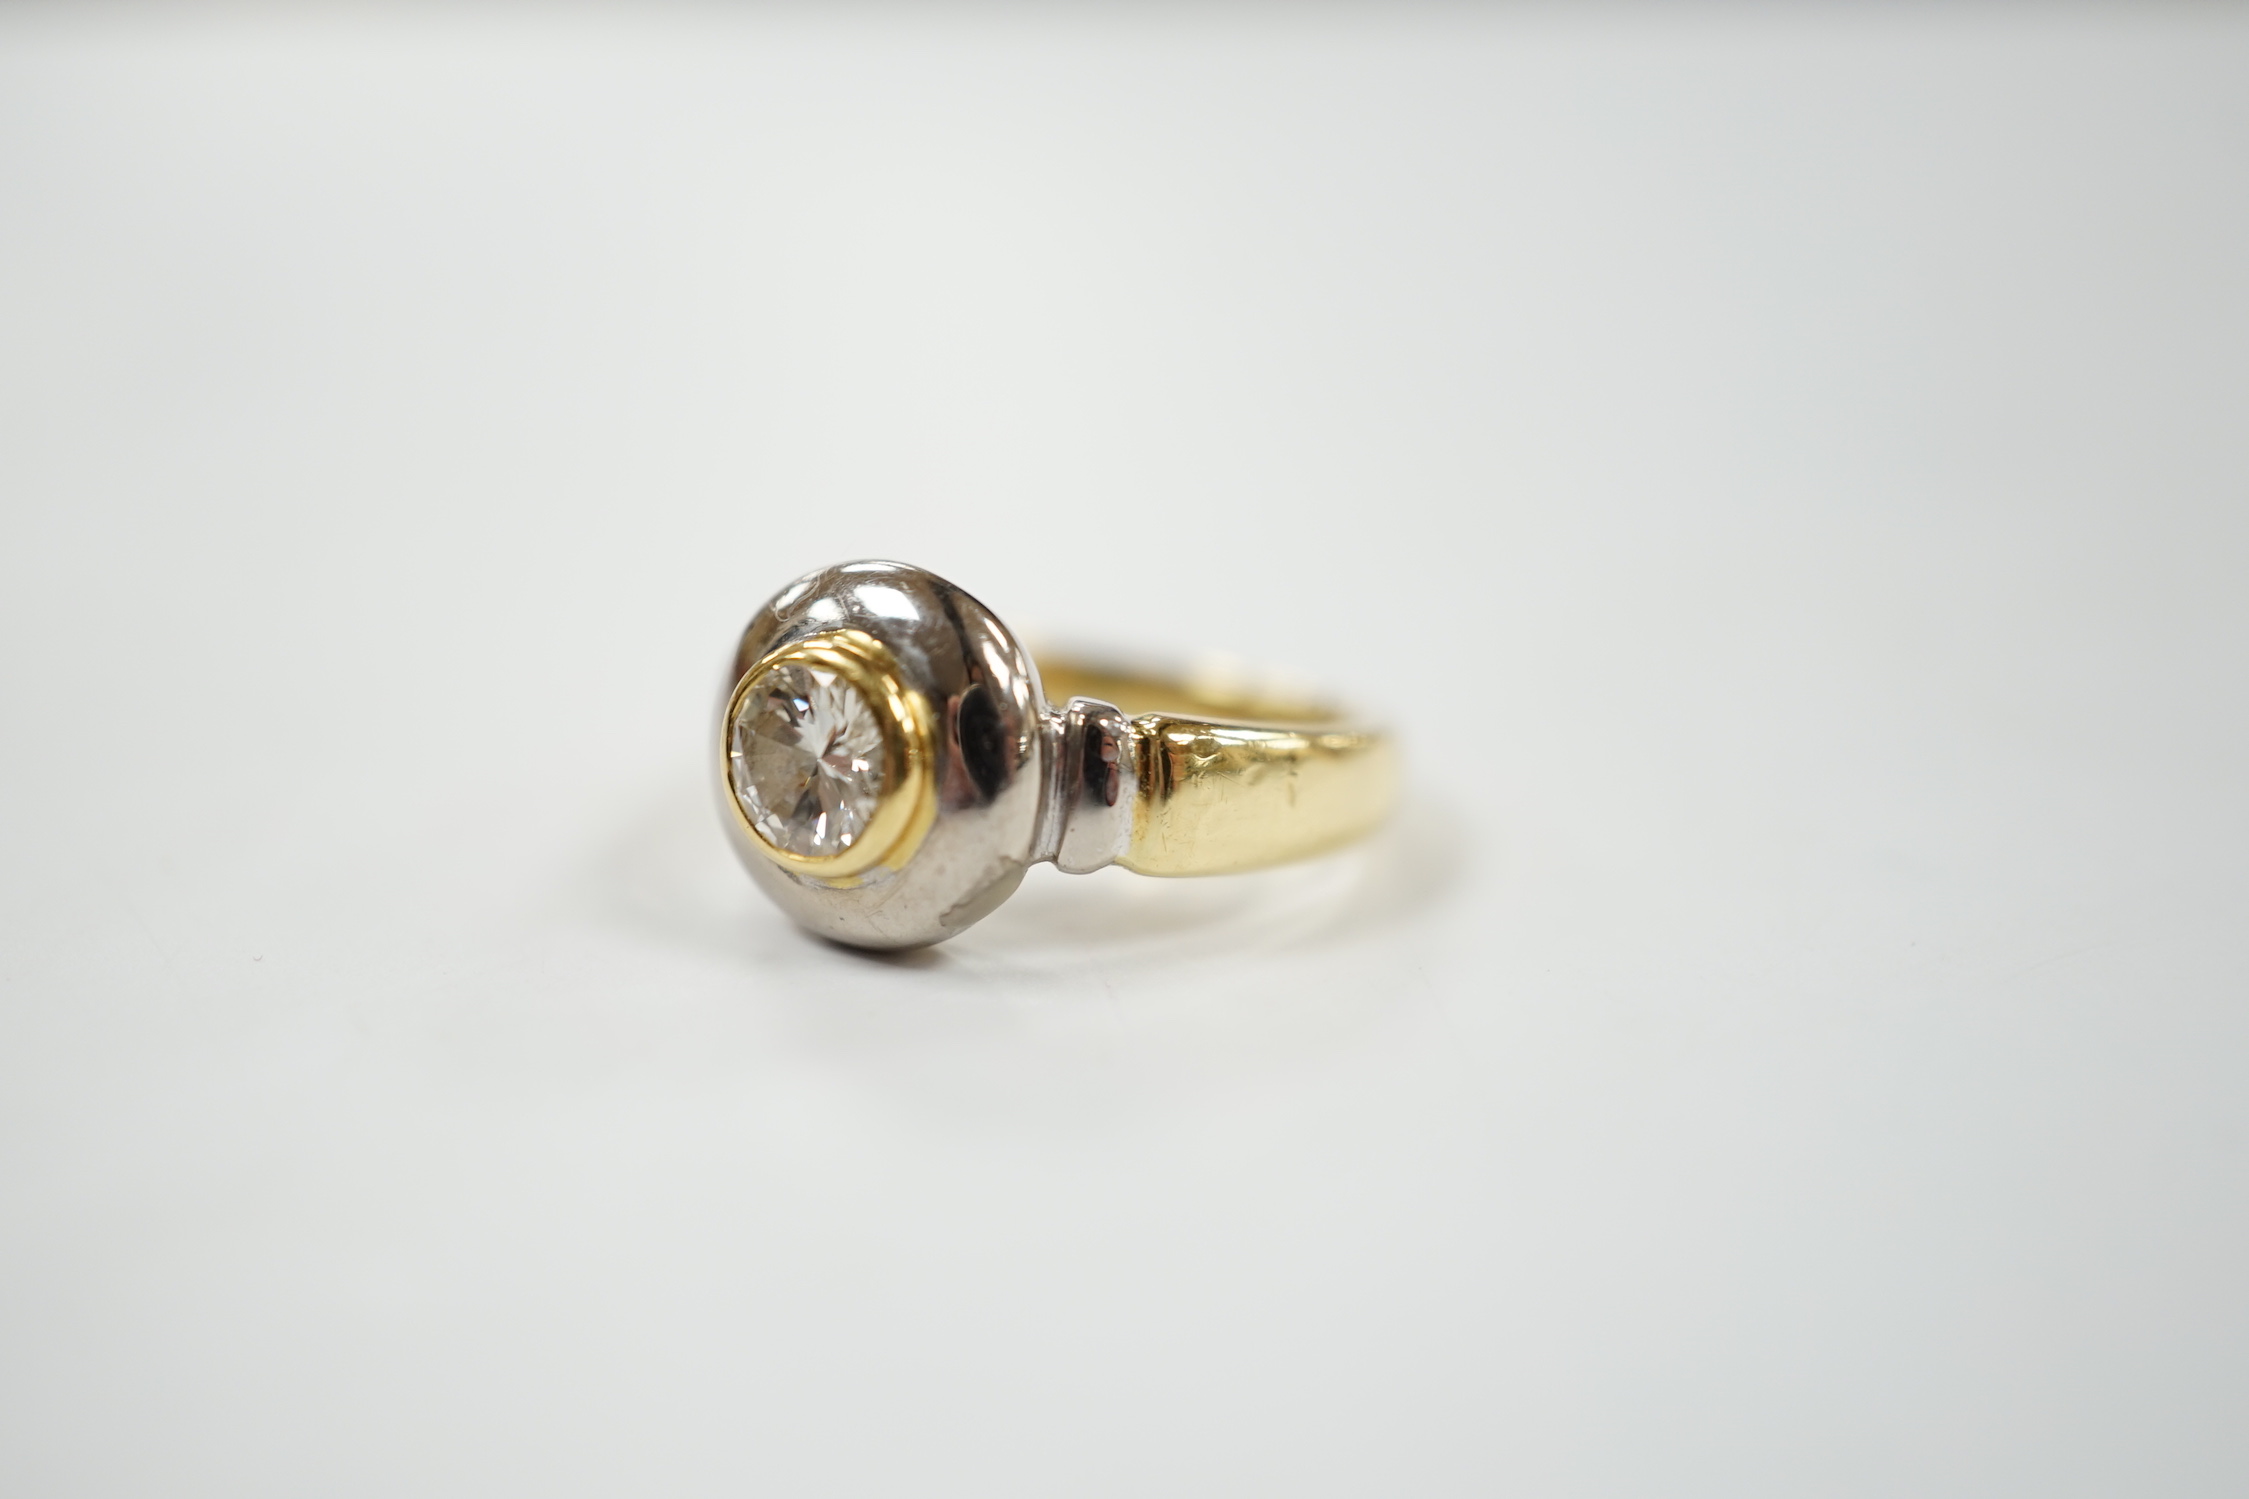 A modern 18ct gold and collet set solitaire diamond ring, with engraving to commemorate the Millenium Dome, the stone weighing 0.40ct, size J, gross weight 6.7 grams.